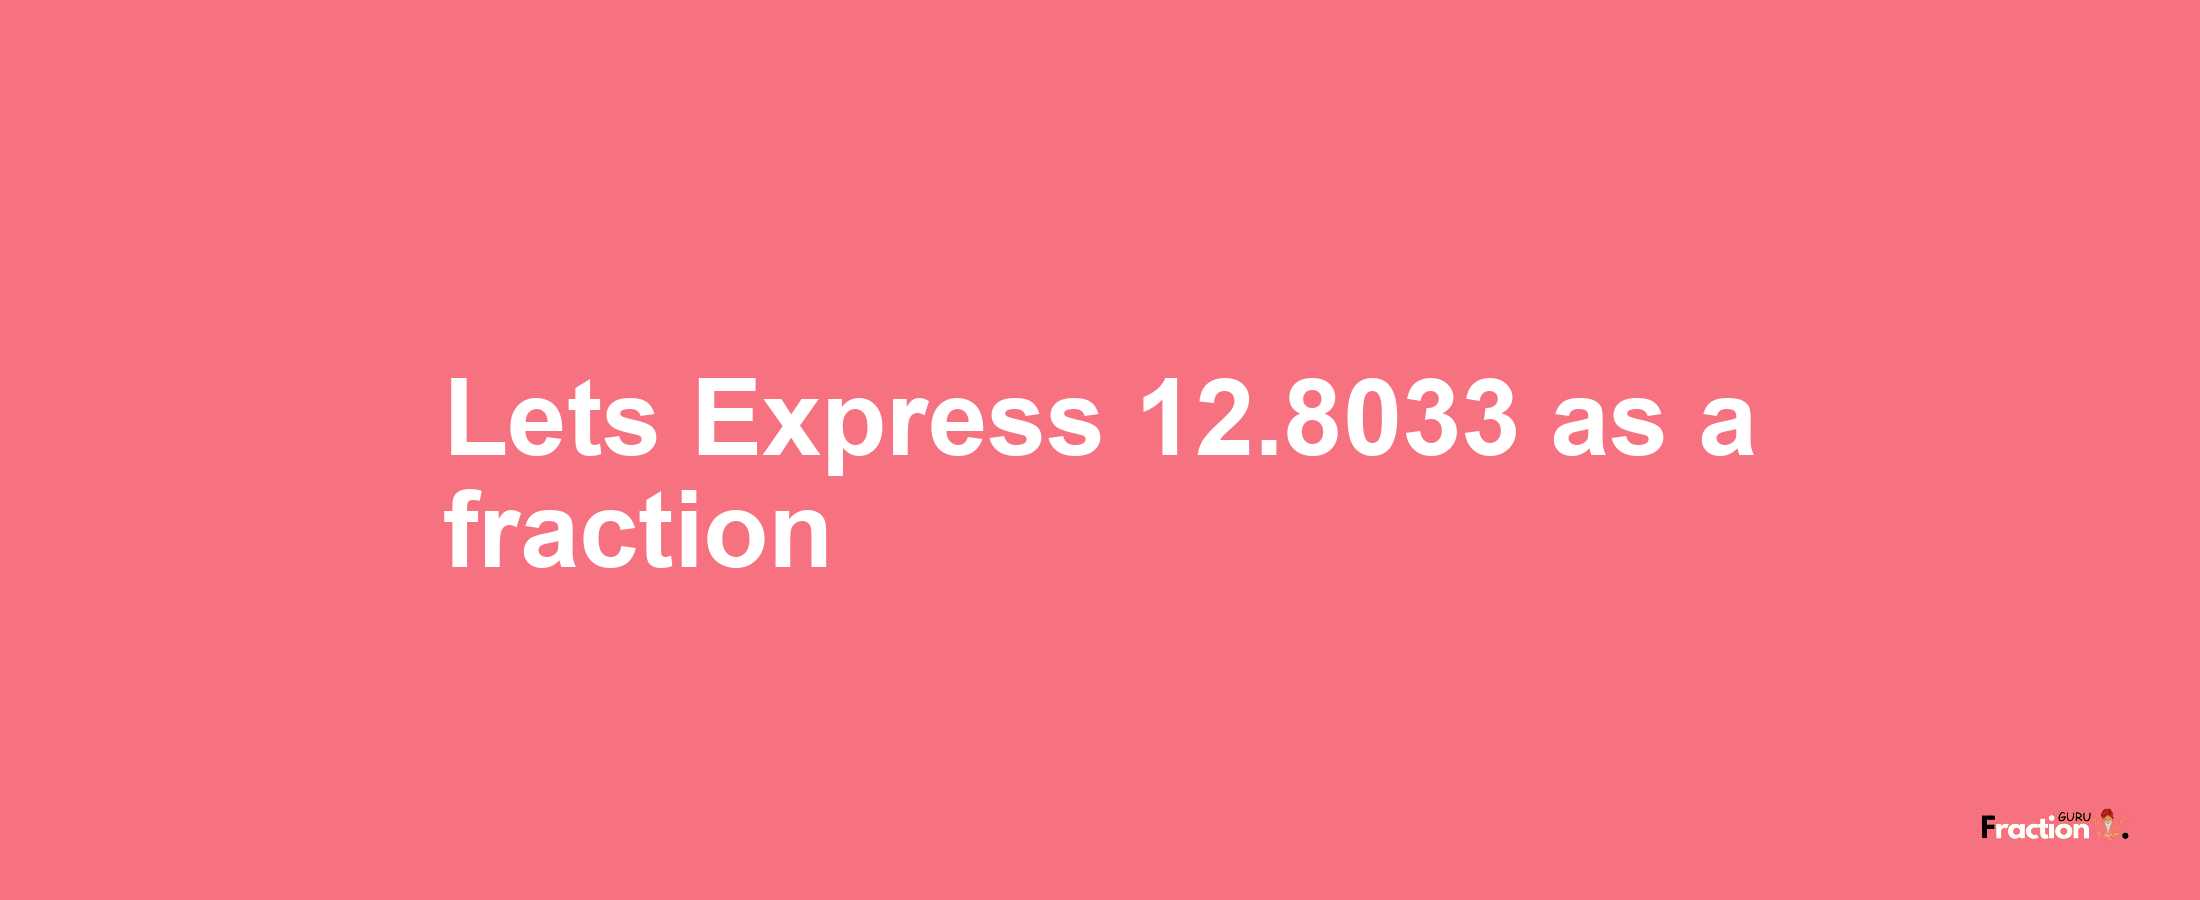 Lets Express 12.8033 as afraction